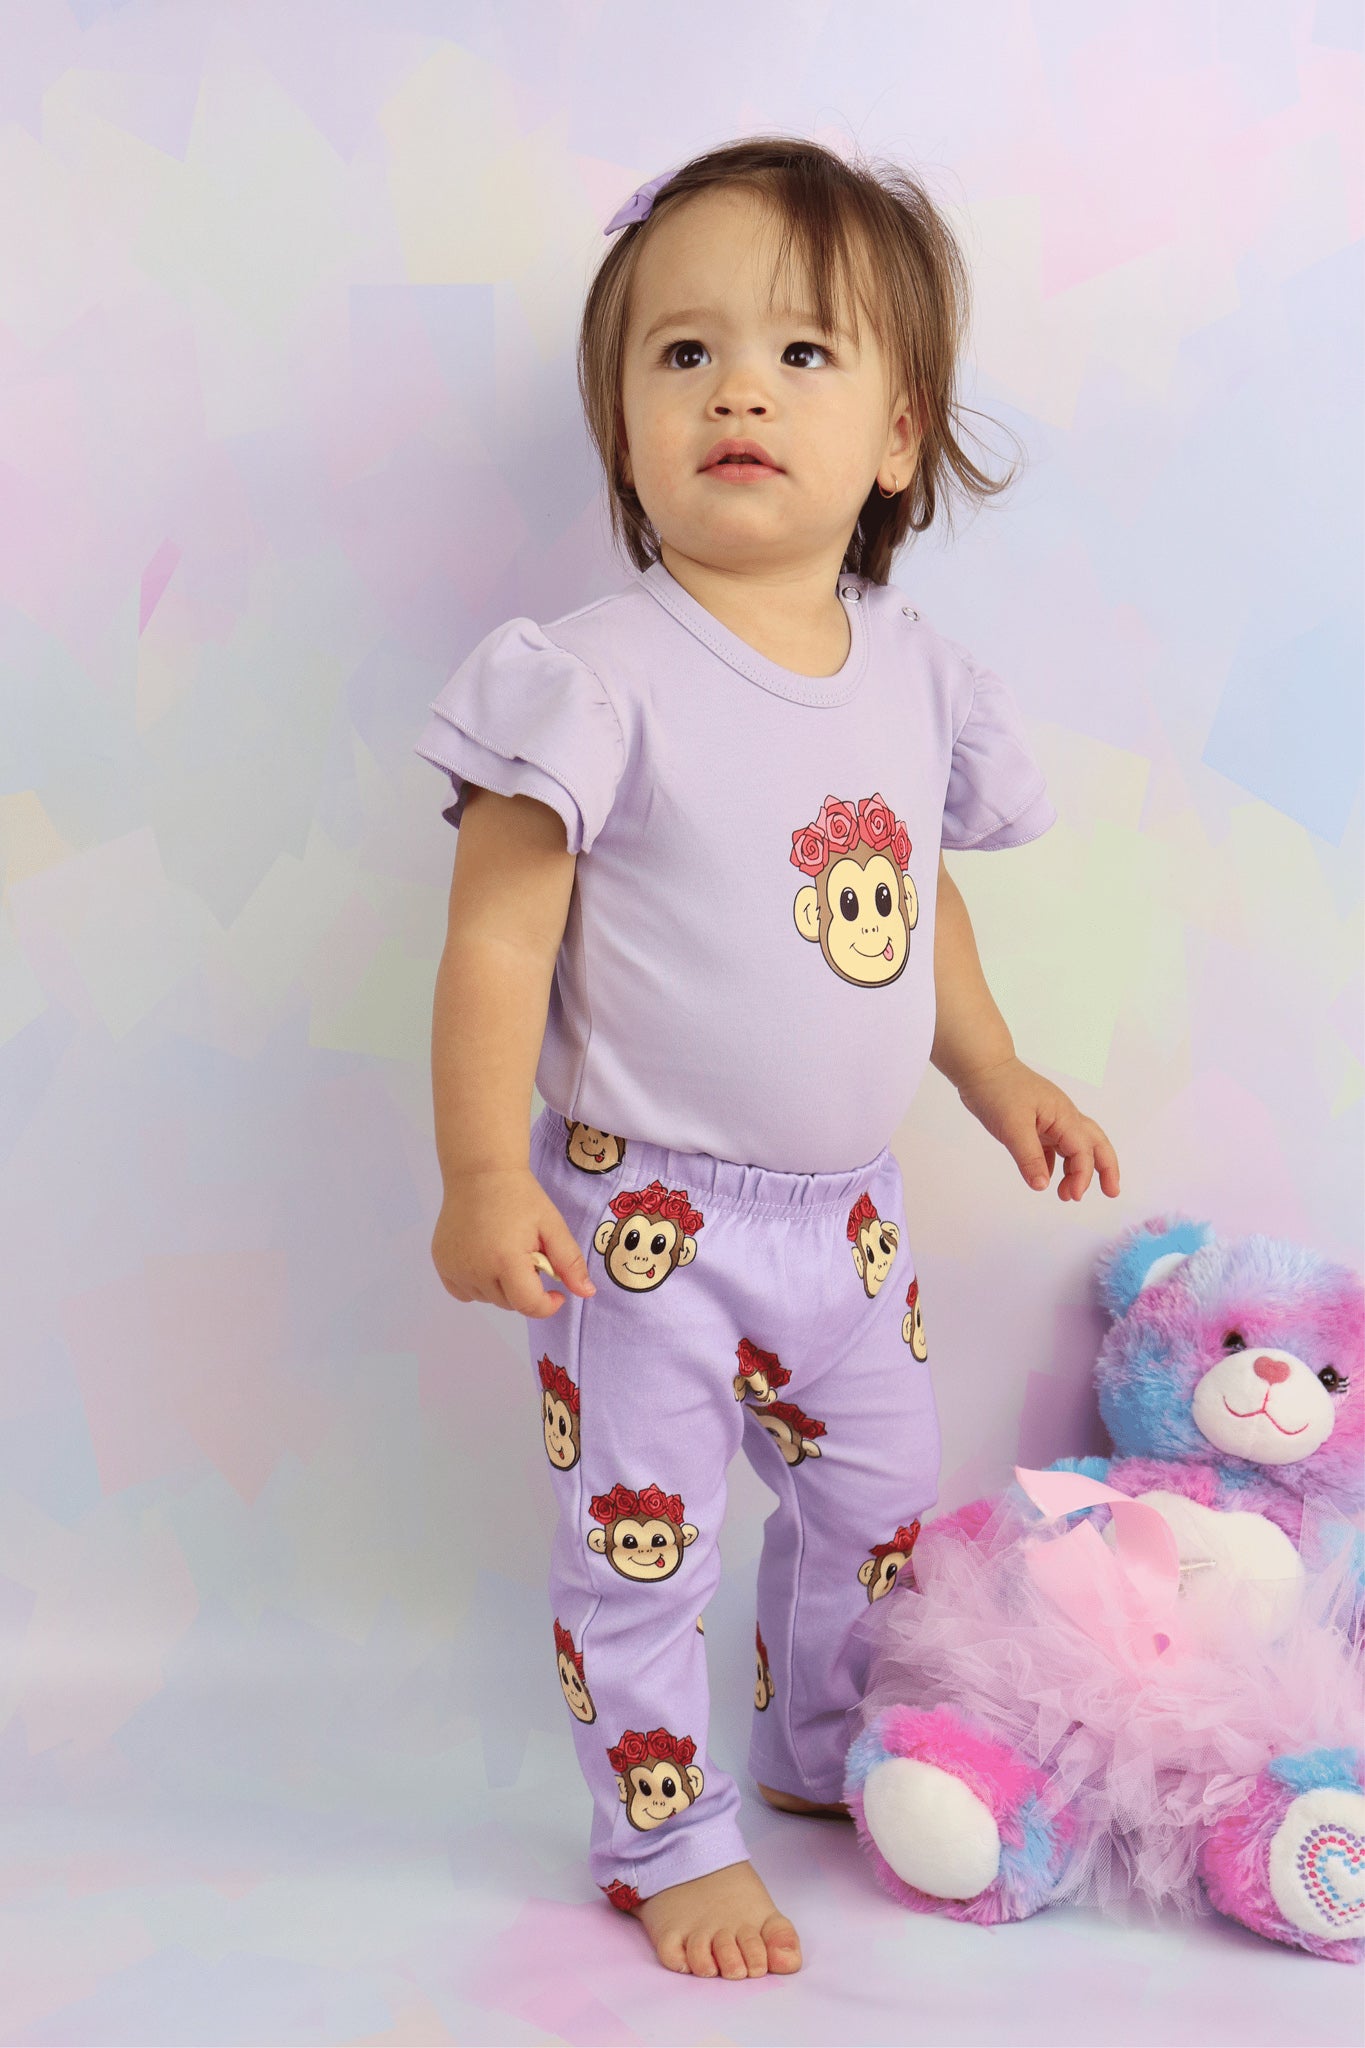 toddler girl standing up, wearing a pastel purple romper with a cute monkey face design on it. Romper has frill short sleeves. Also wearing matching purple pants with cute monkey faces printed all over